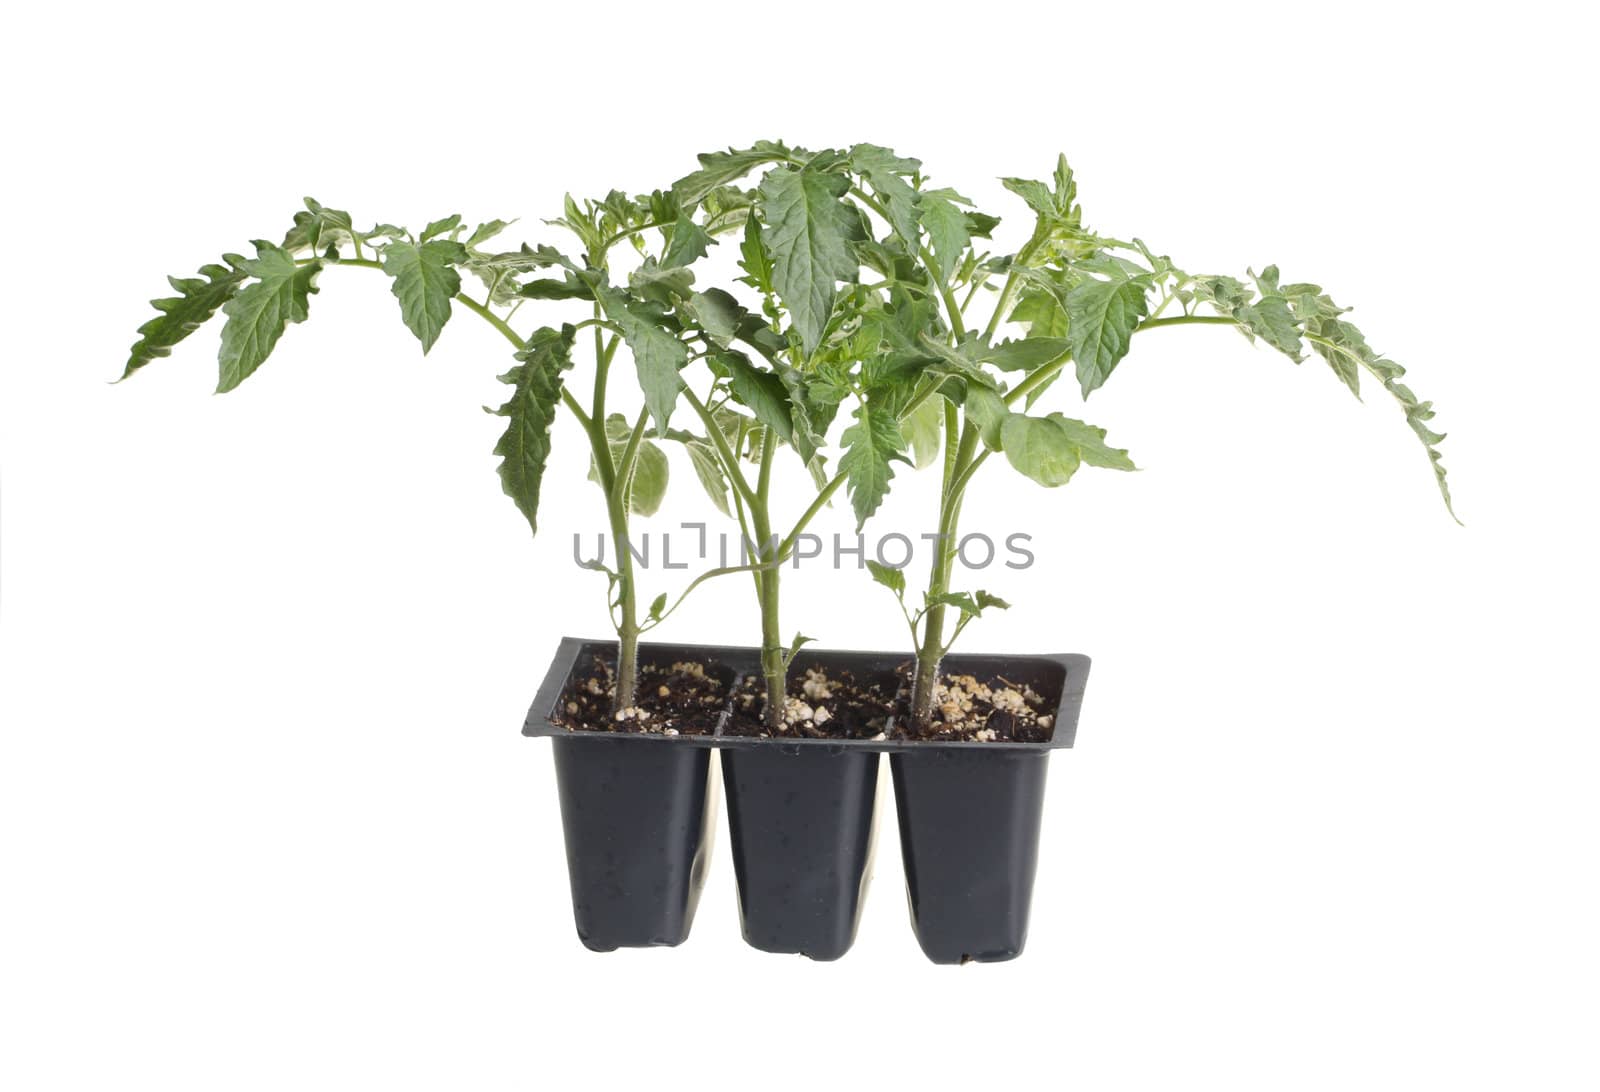 Pack of three tomato seedlings isolated against white by sgoodwin4813